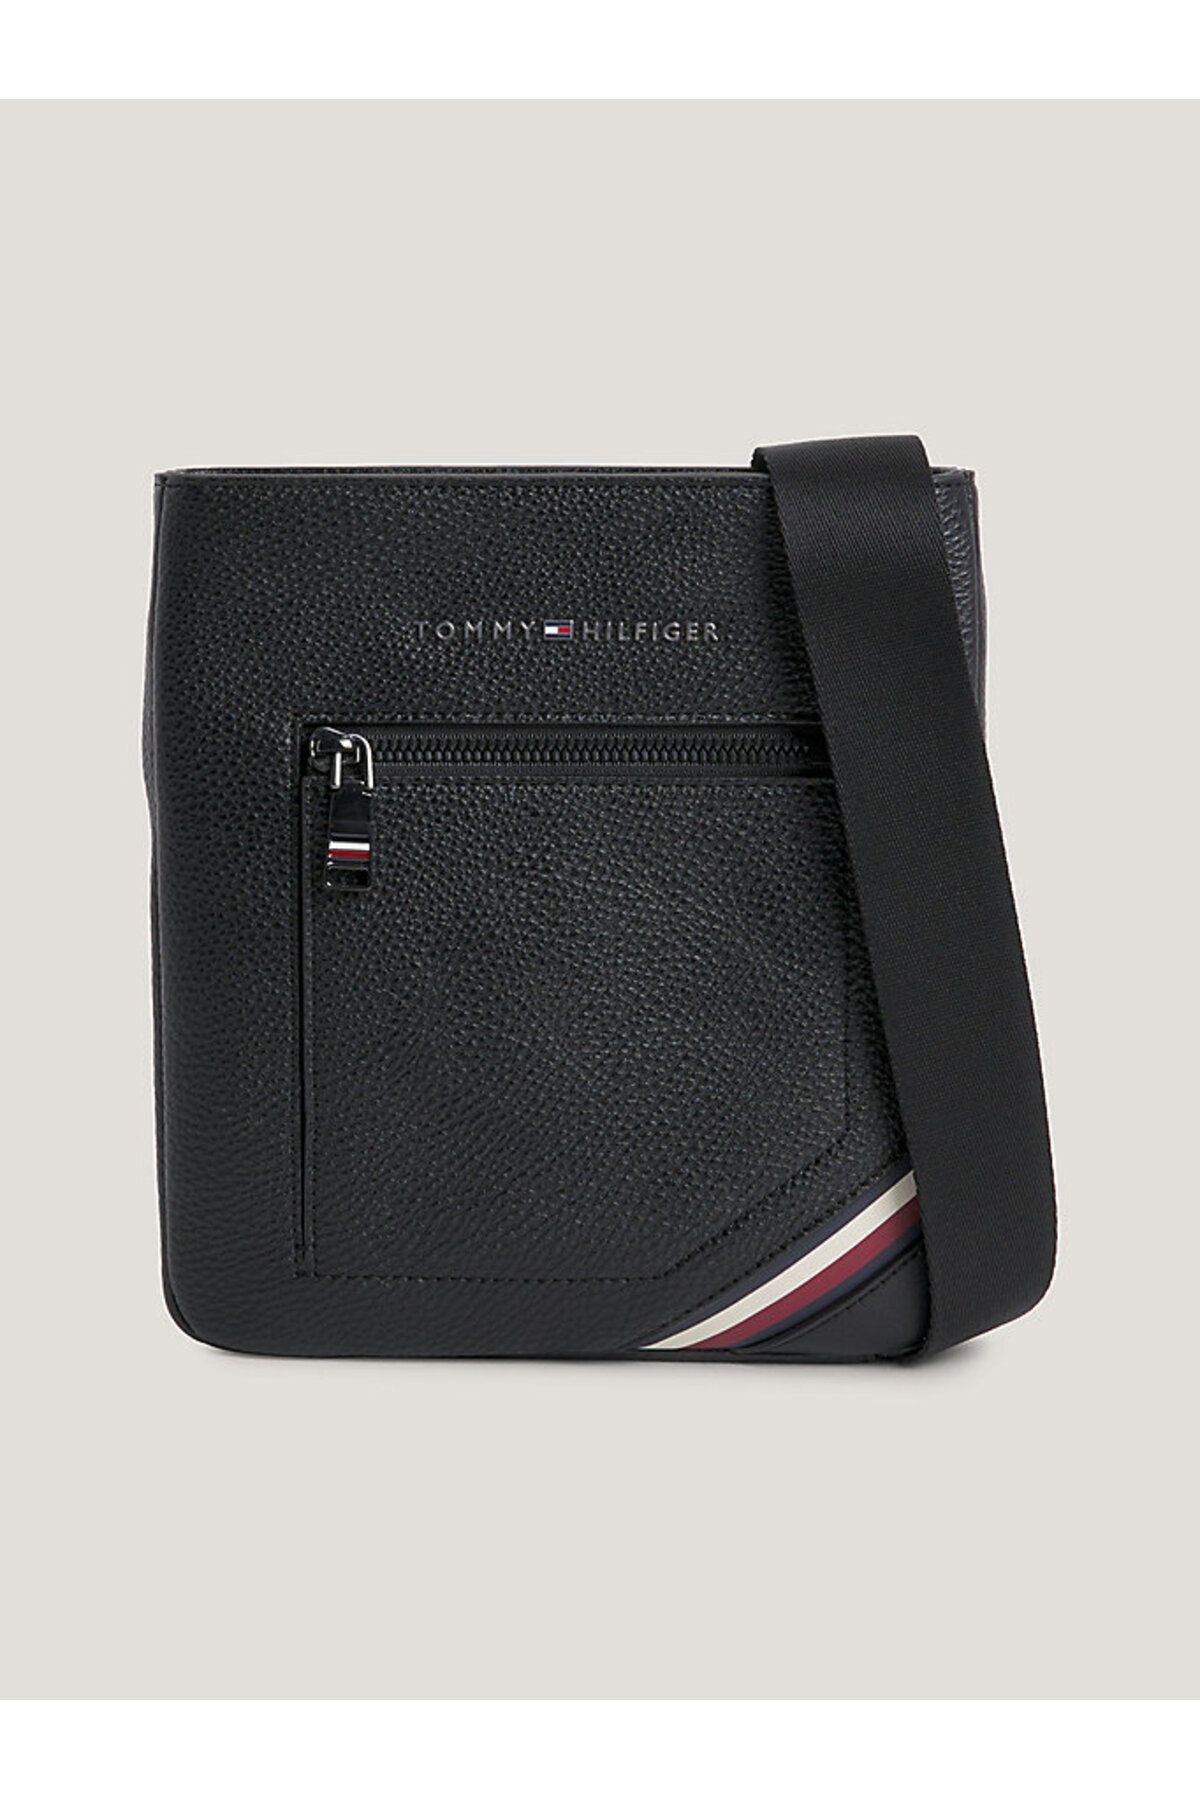 Tommy Hilfiger TH CENTRAL MINI CROSSOVER